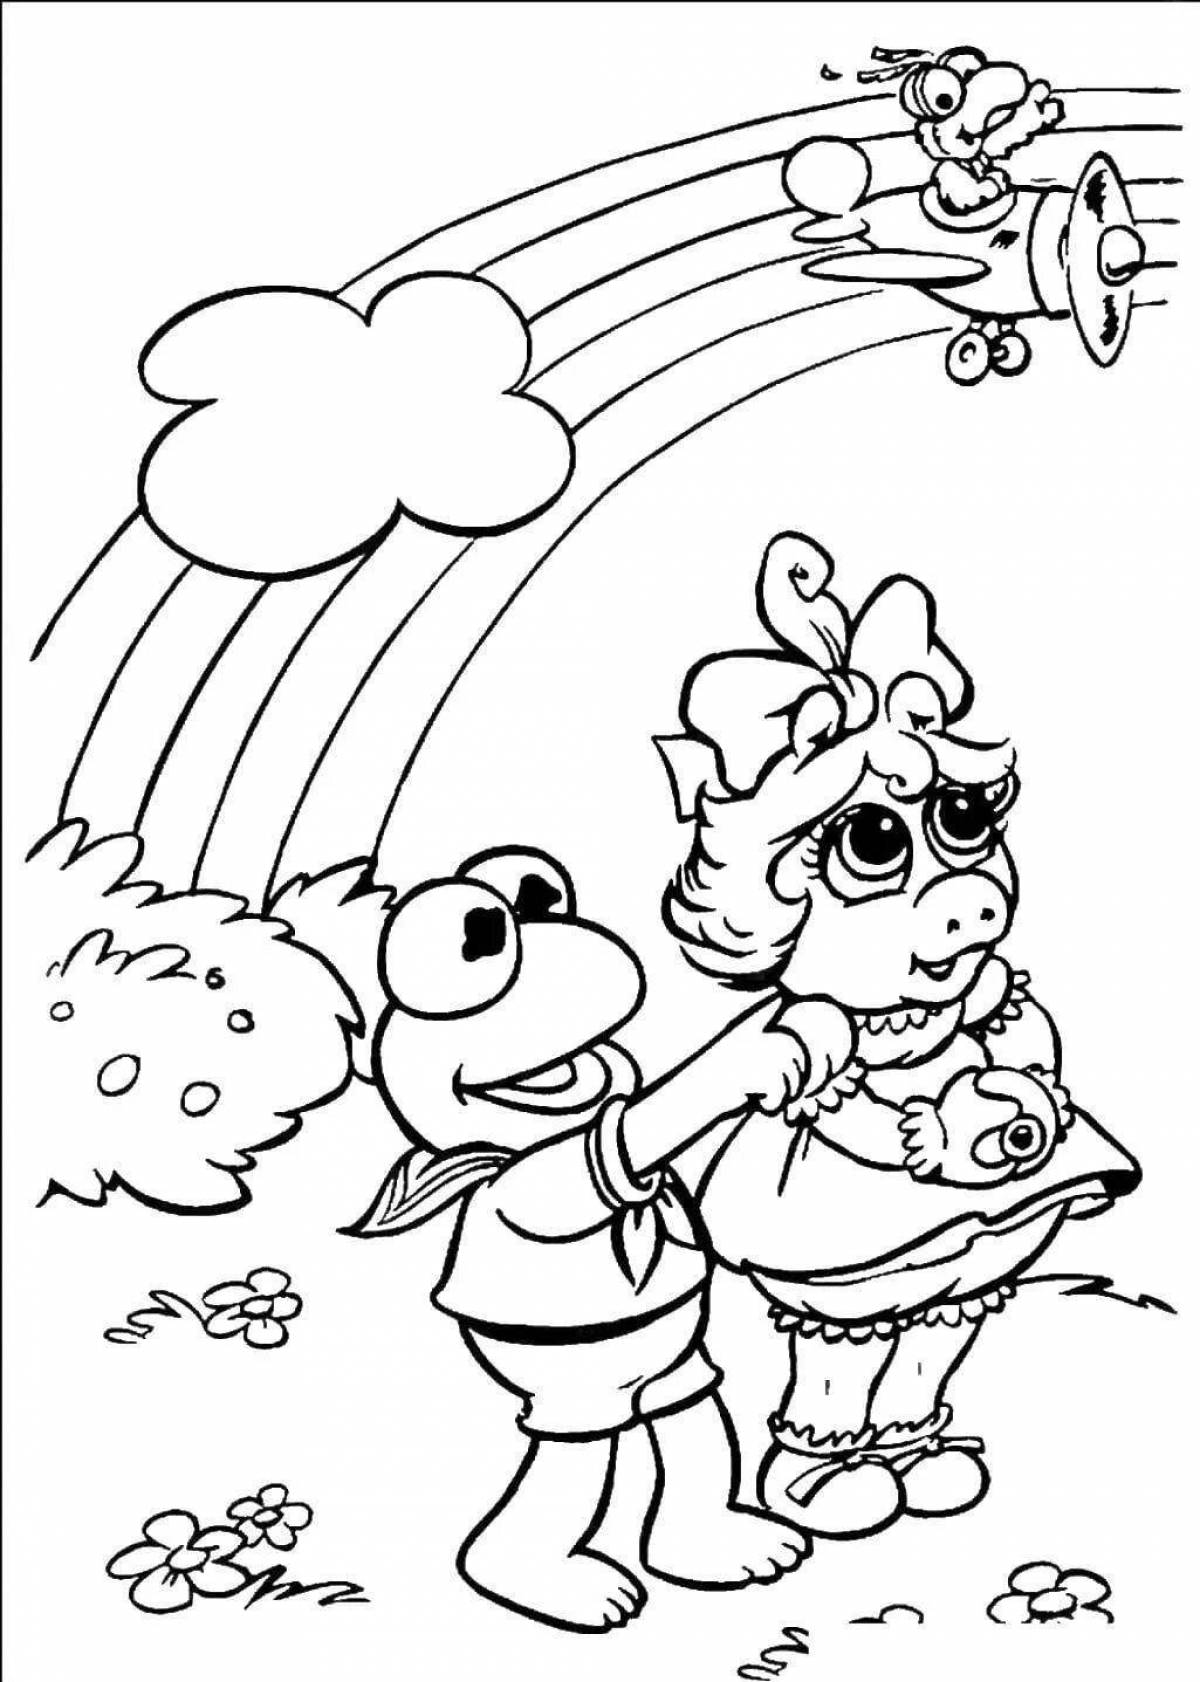 Color-fever rainbow friends coloring page